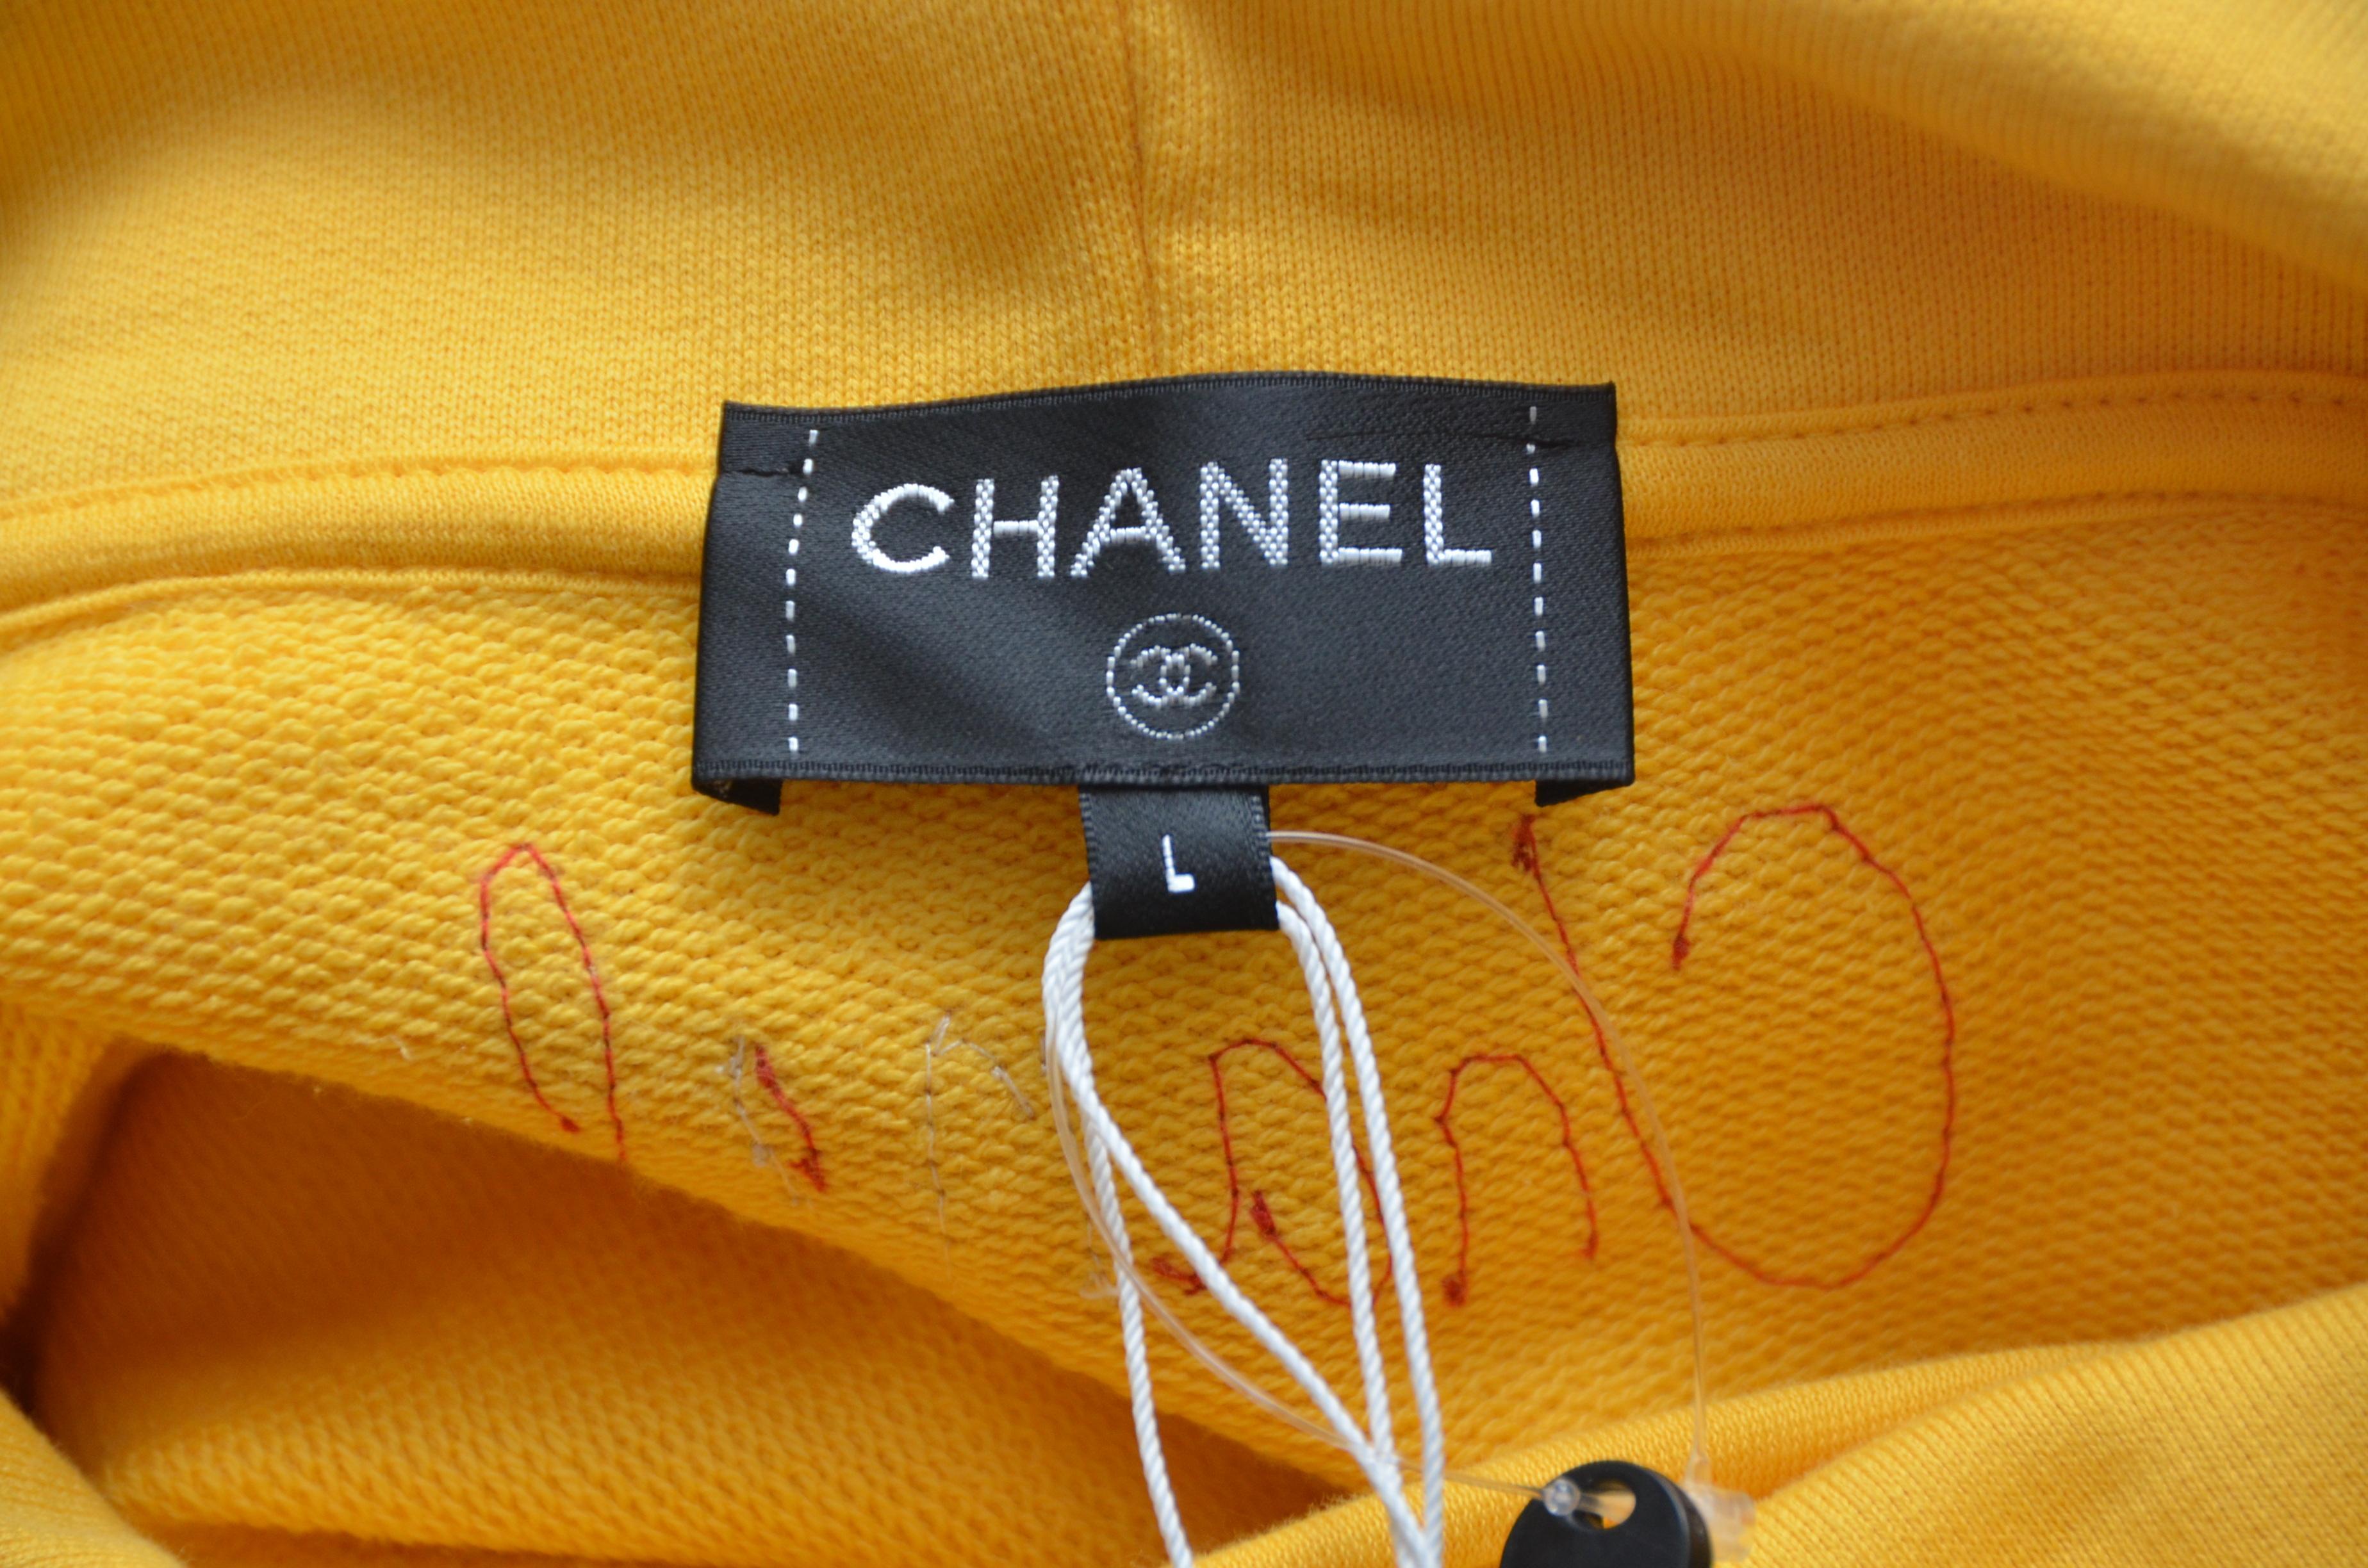  Chanel x Pharrell Capsule Collection Hoodie  Lesage Embroidery Yellow  L NEW 2